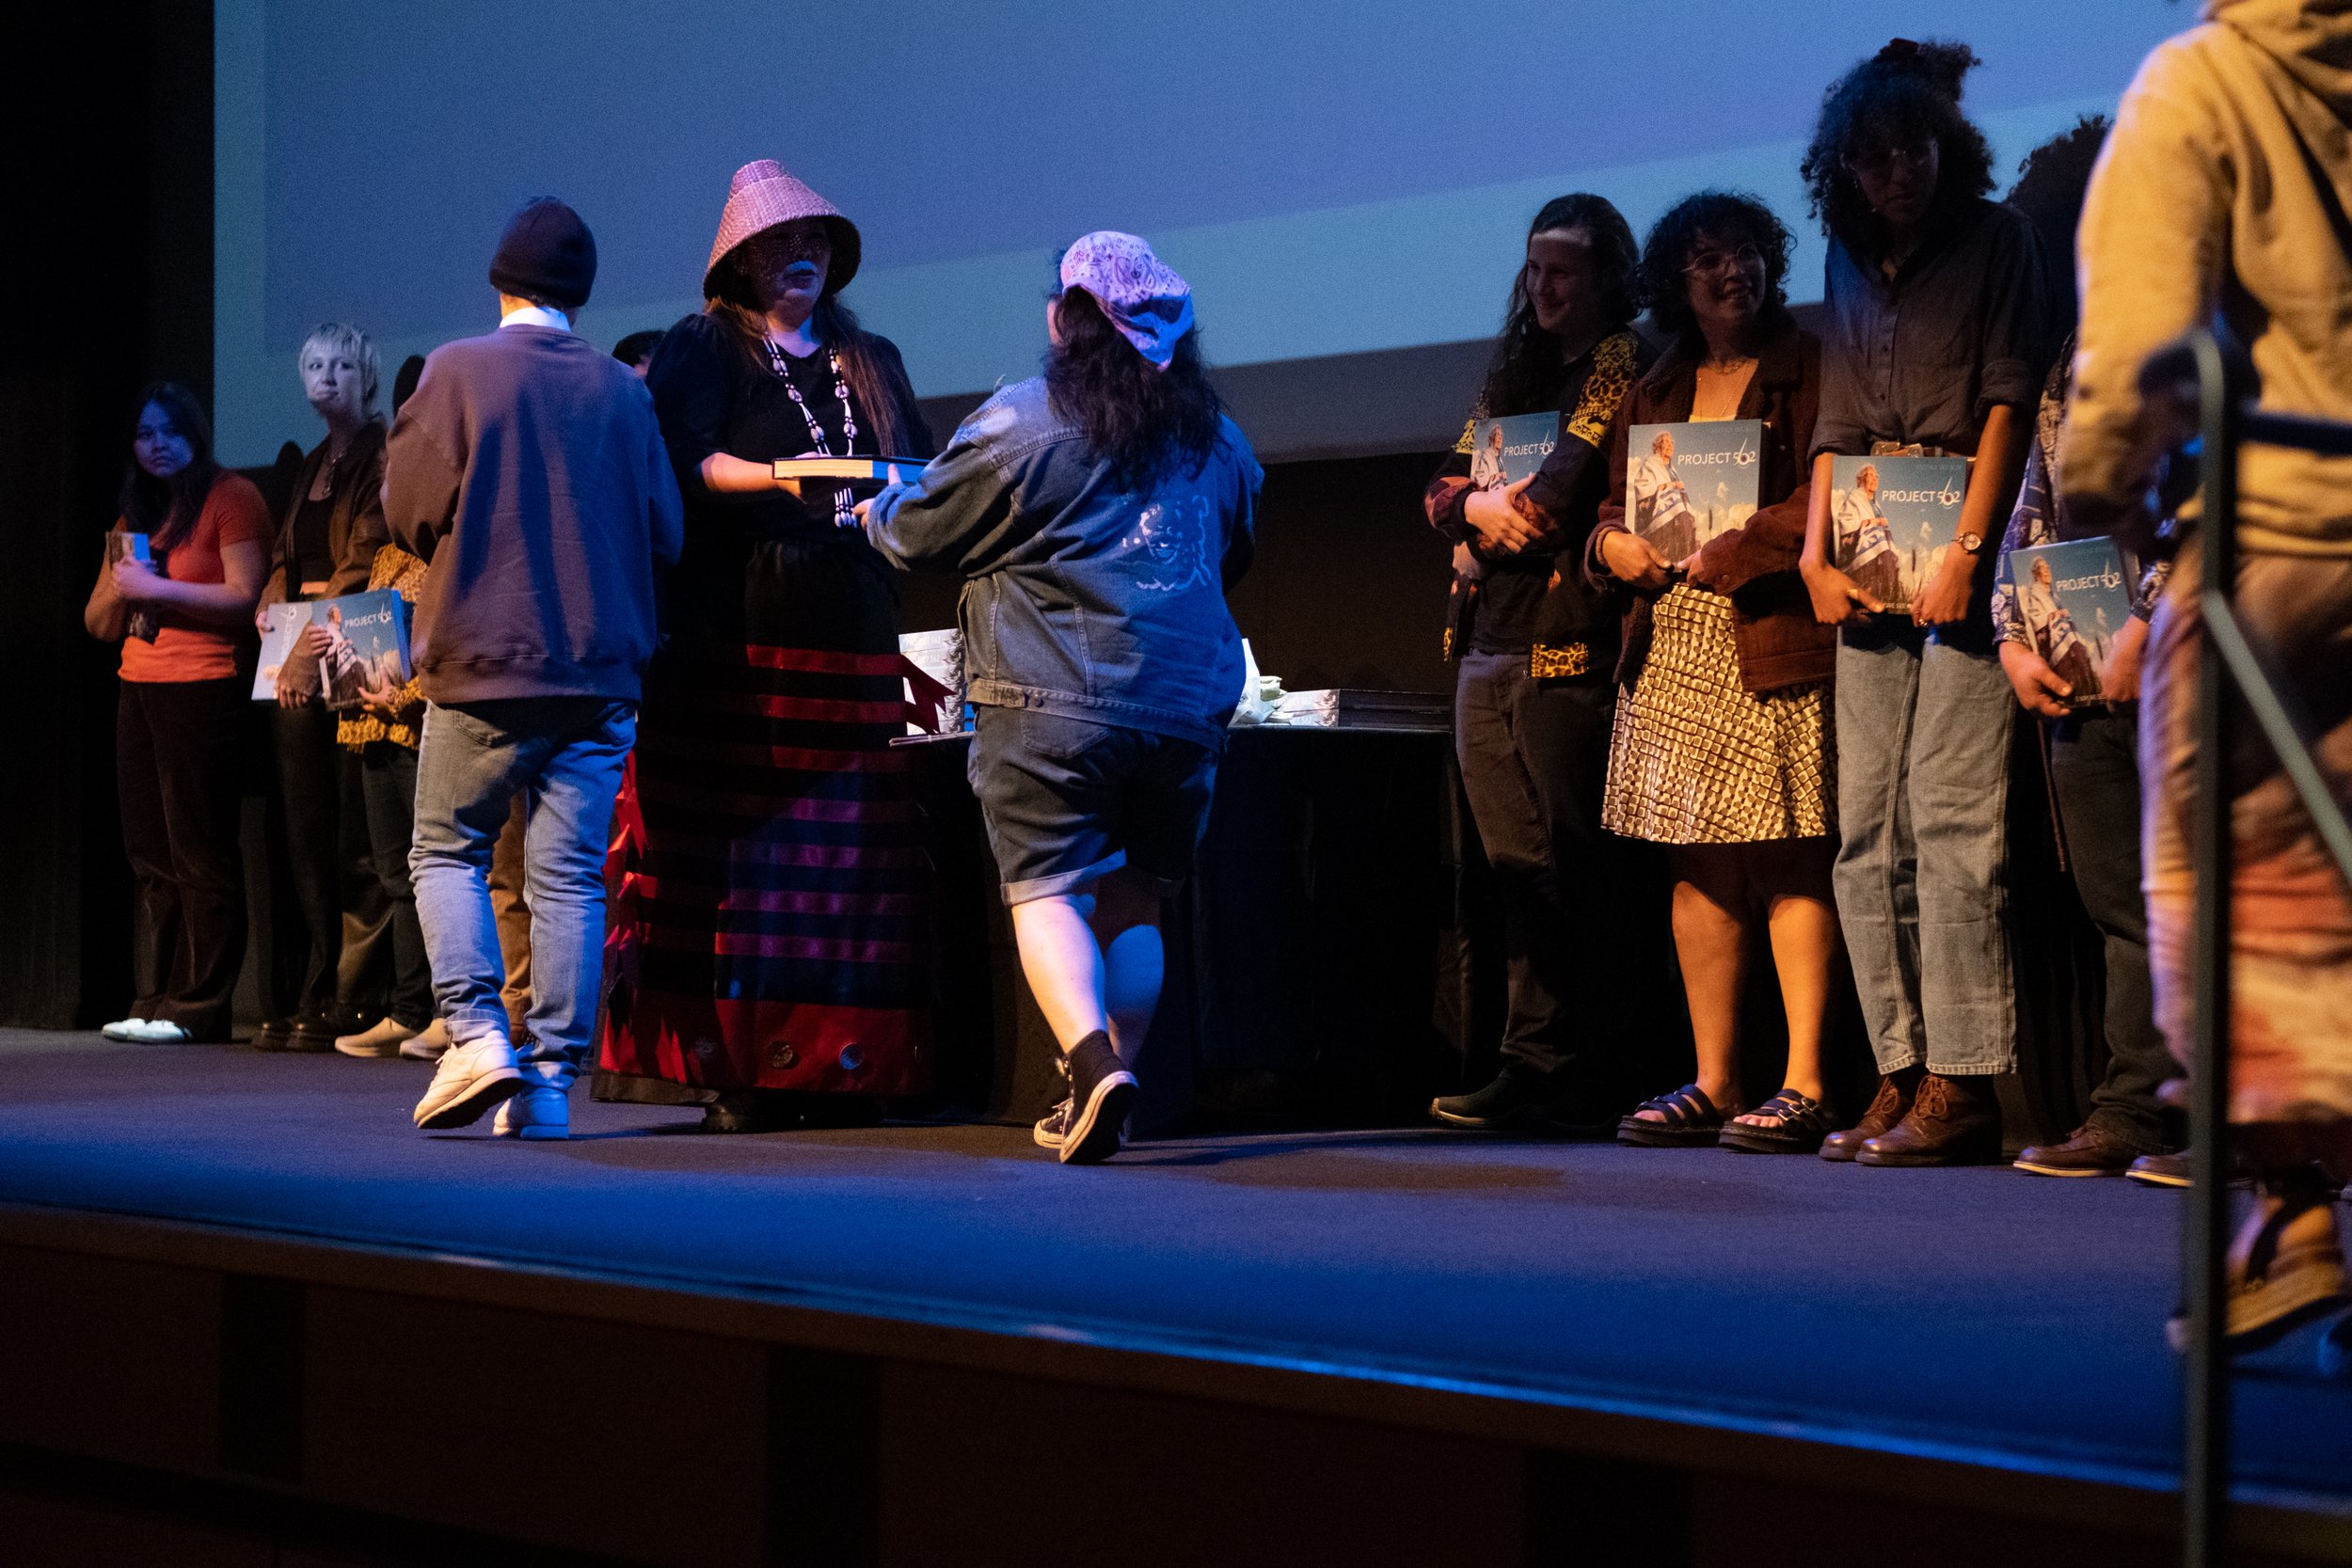  On Monday May 8th, 2023, Matika Wilbur, author of "Project 562, Changing The Way We See Native America", at the BroadStage Theater in Santa Monica, Calif., presents copies of her books as gifts to the Santa Monica College students who were instrumen